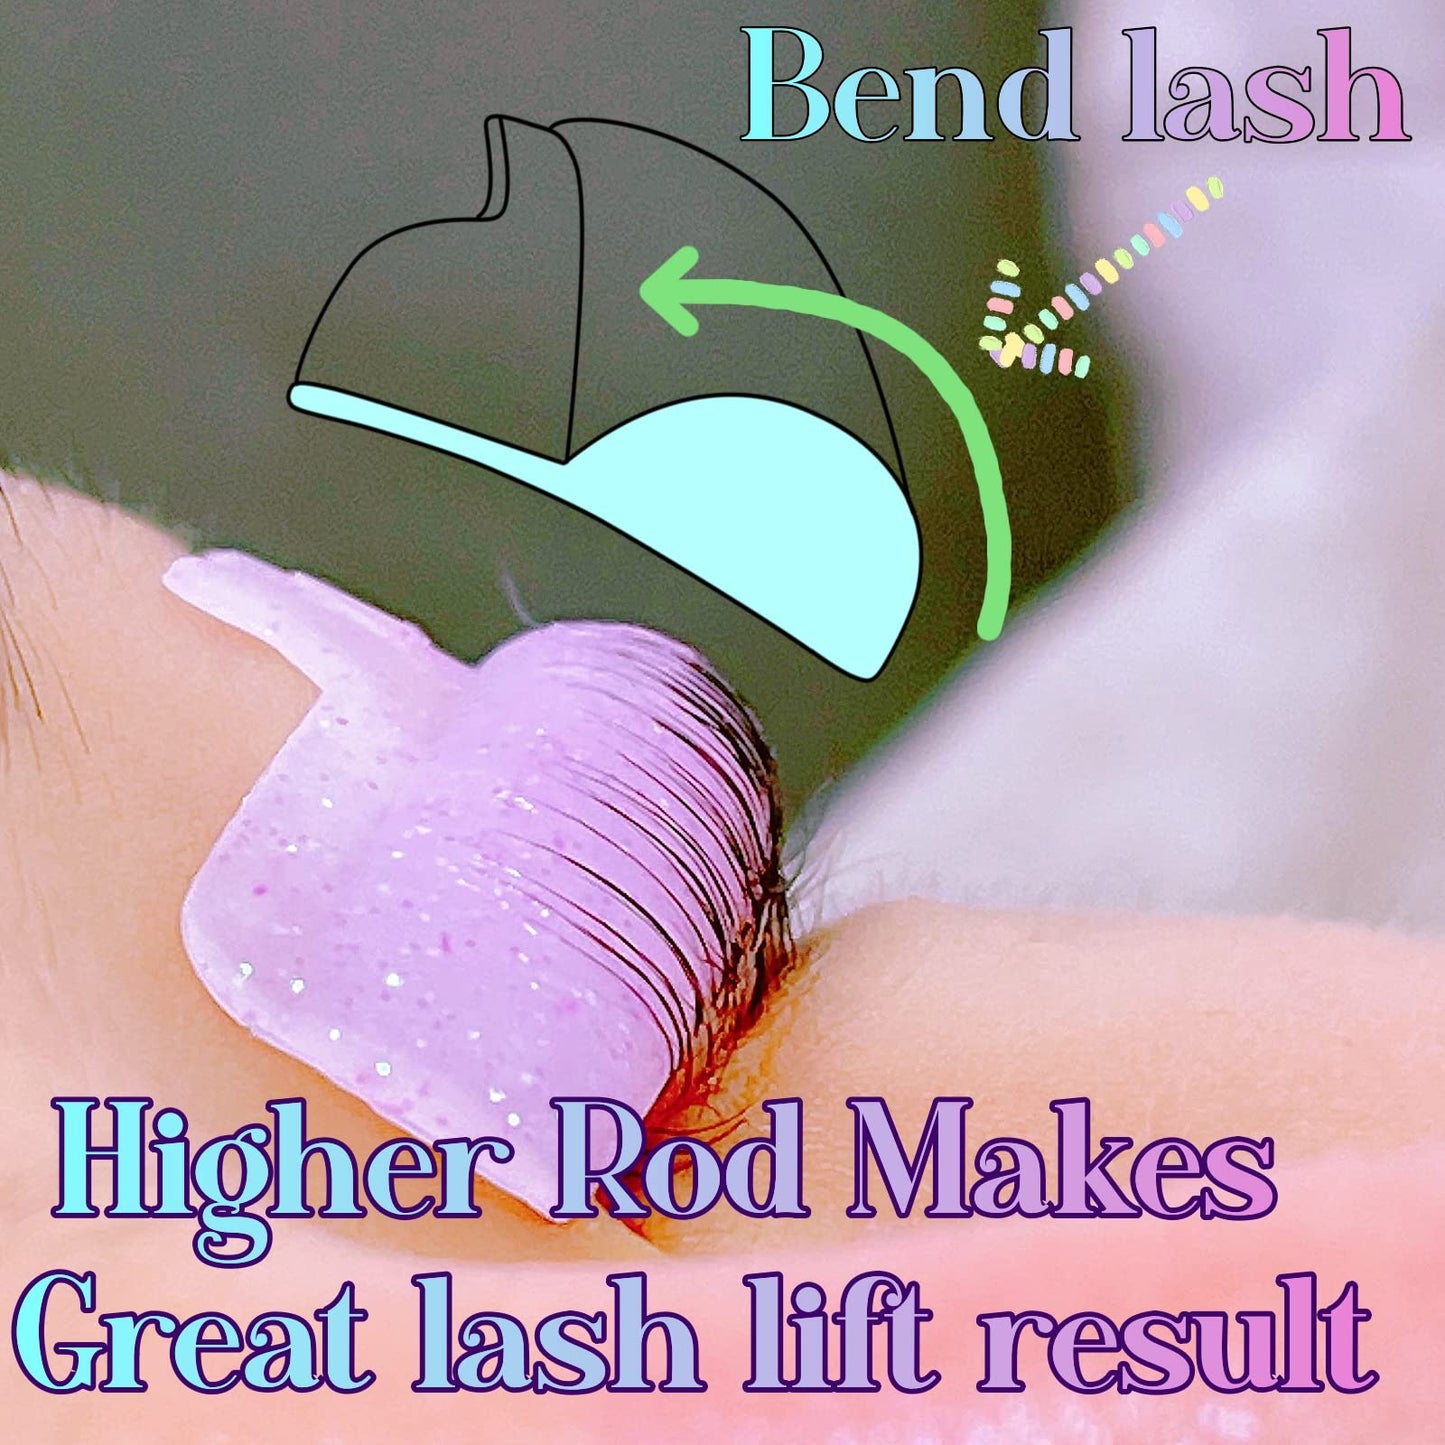 Lash Lift Shield Ultra Curl Eyelash Perm Rods Shiny Perming Roller with 5 Sizes Delight Lifting Result Like Eyelash Extension Big U Rod More Than 200 Application Reusable Curler Tool